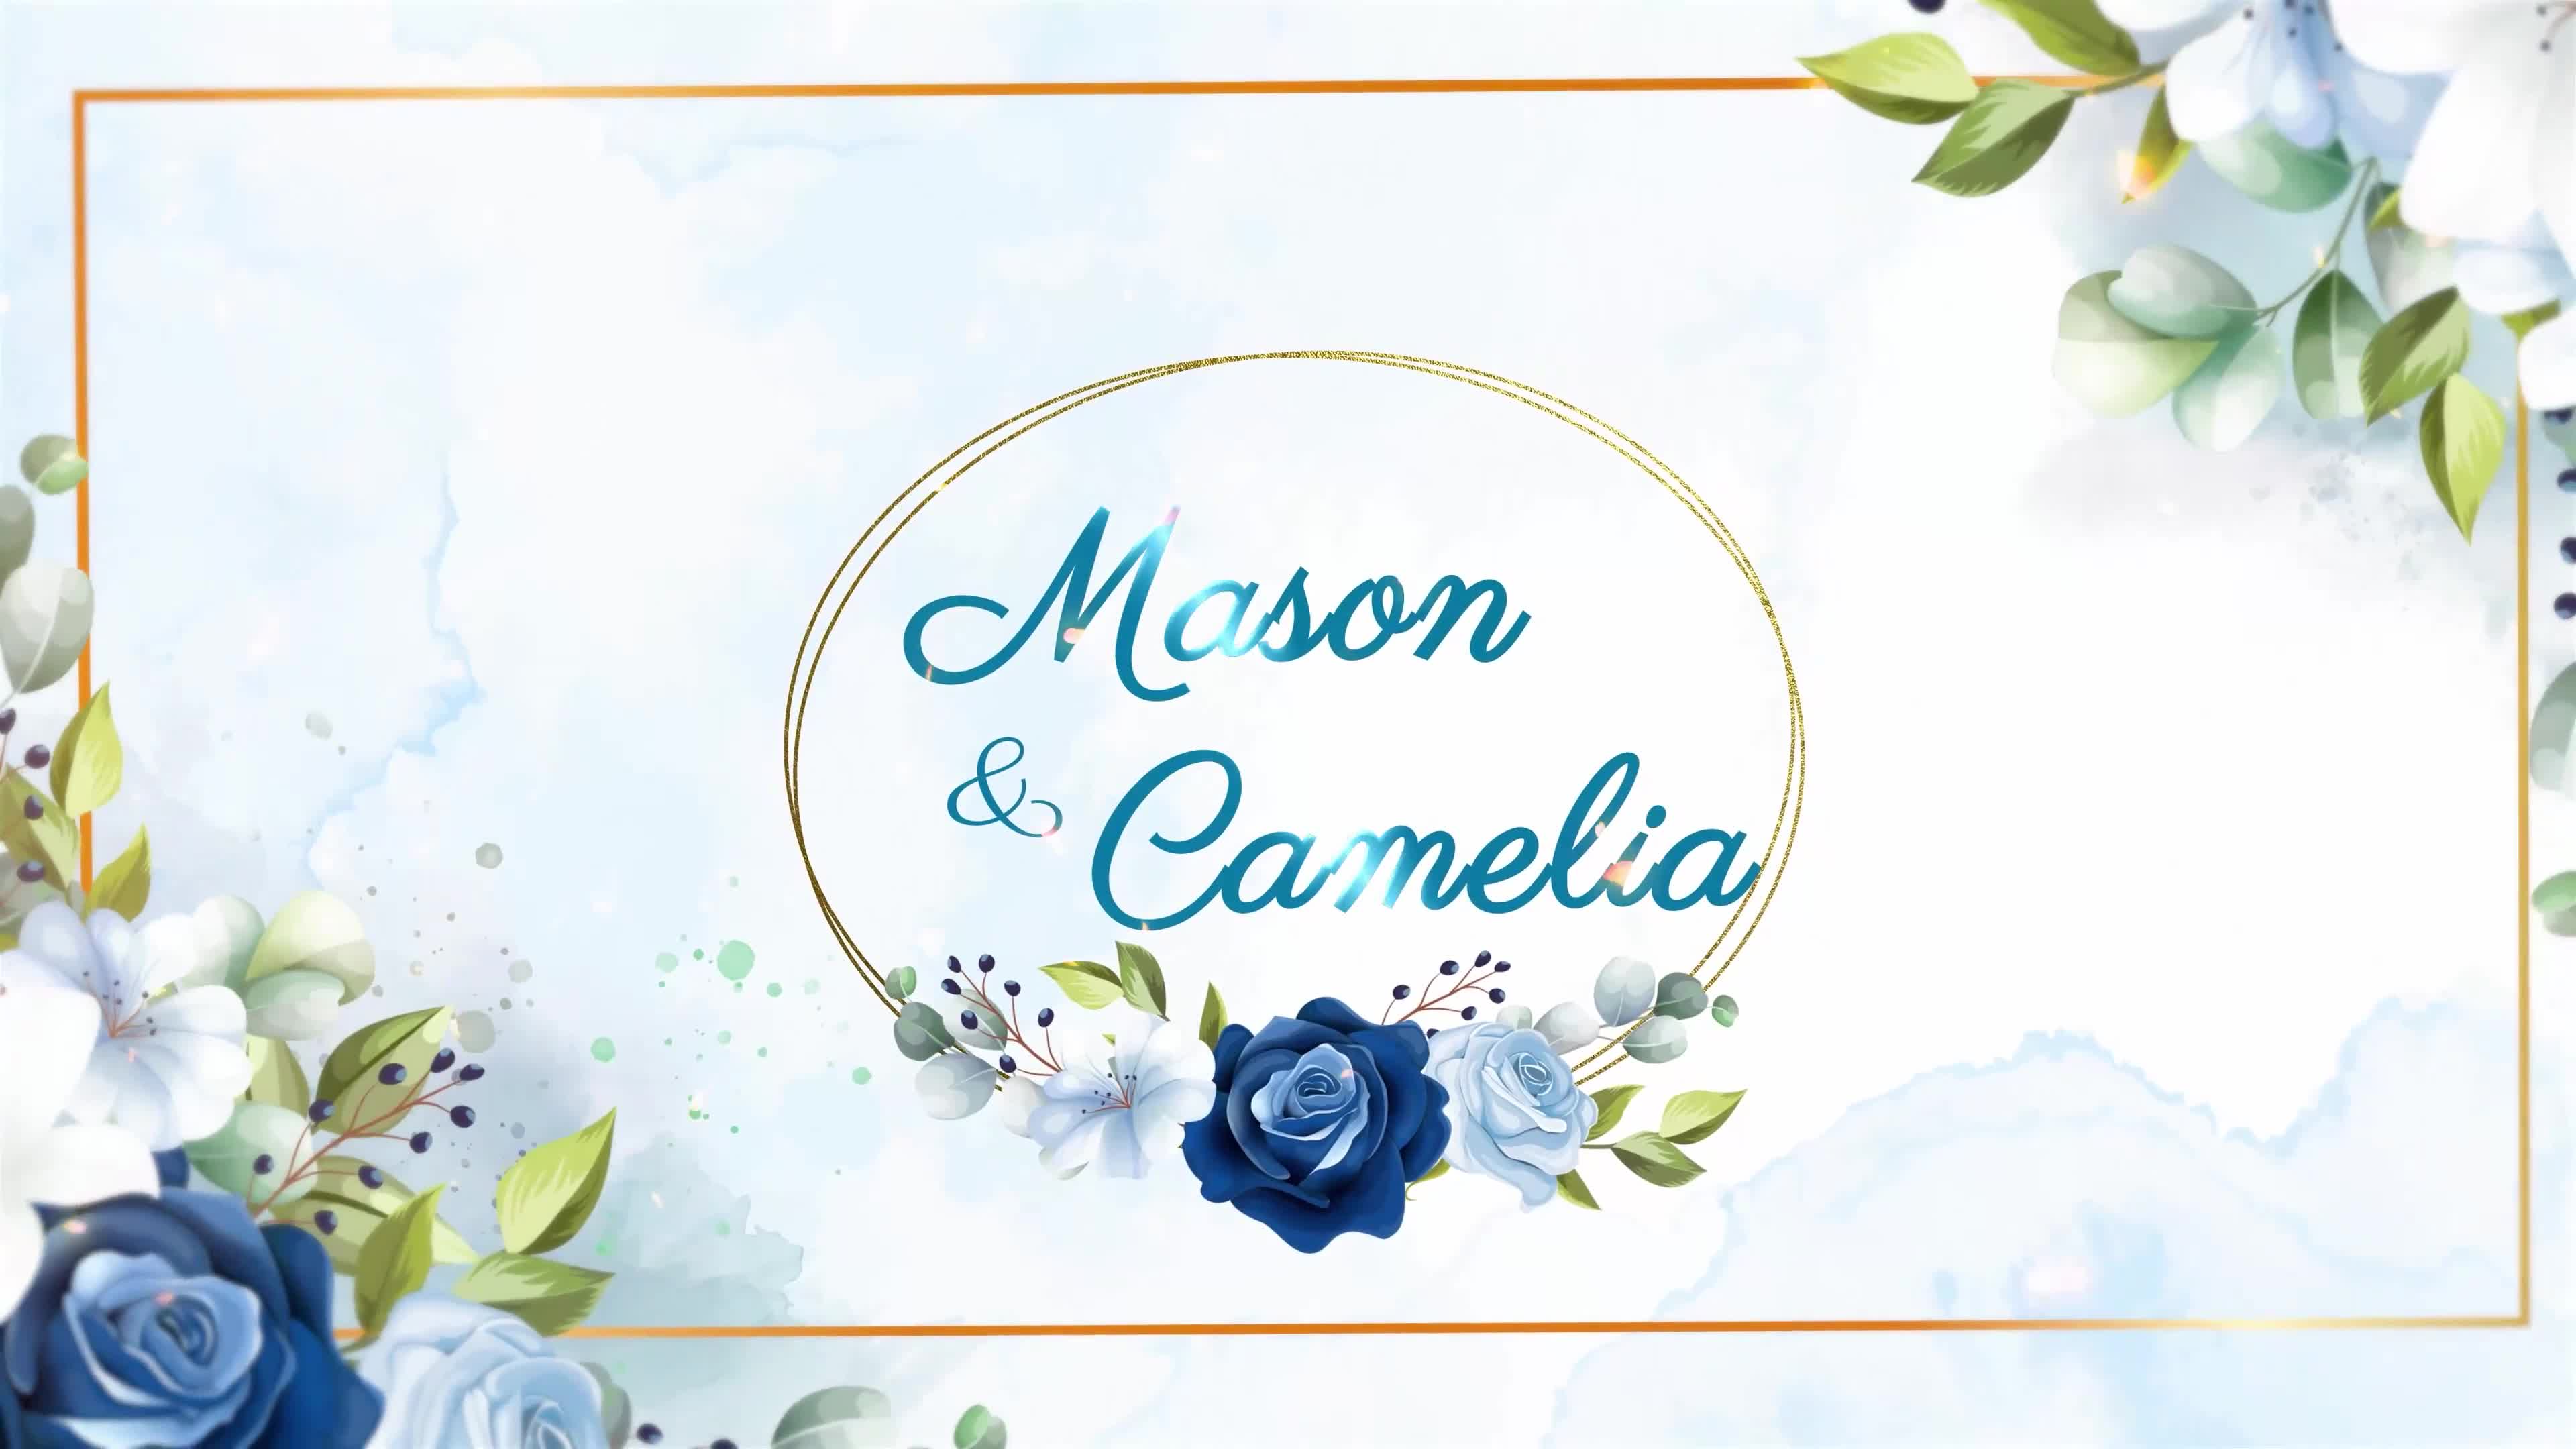 floral wedding invitation after effects template free download